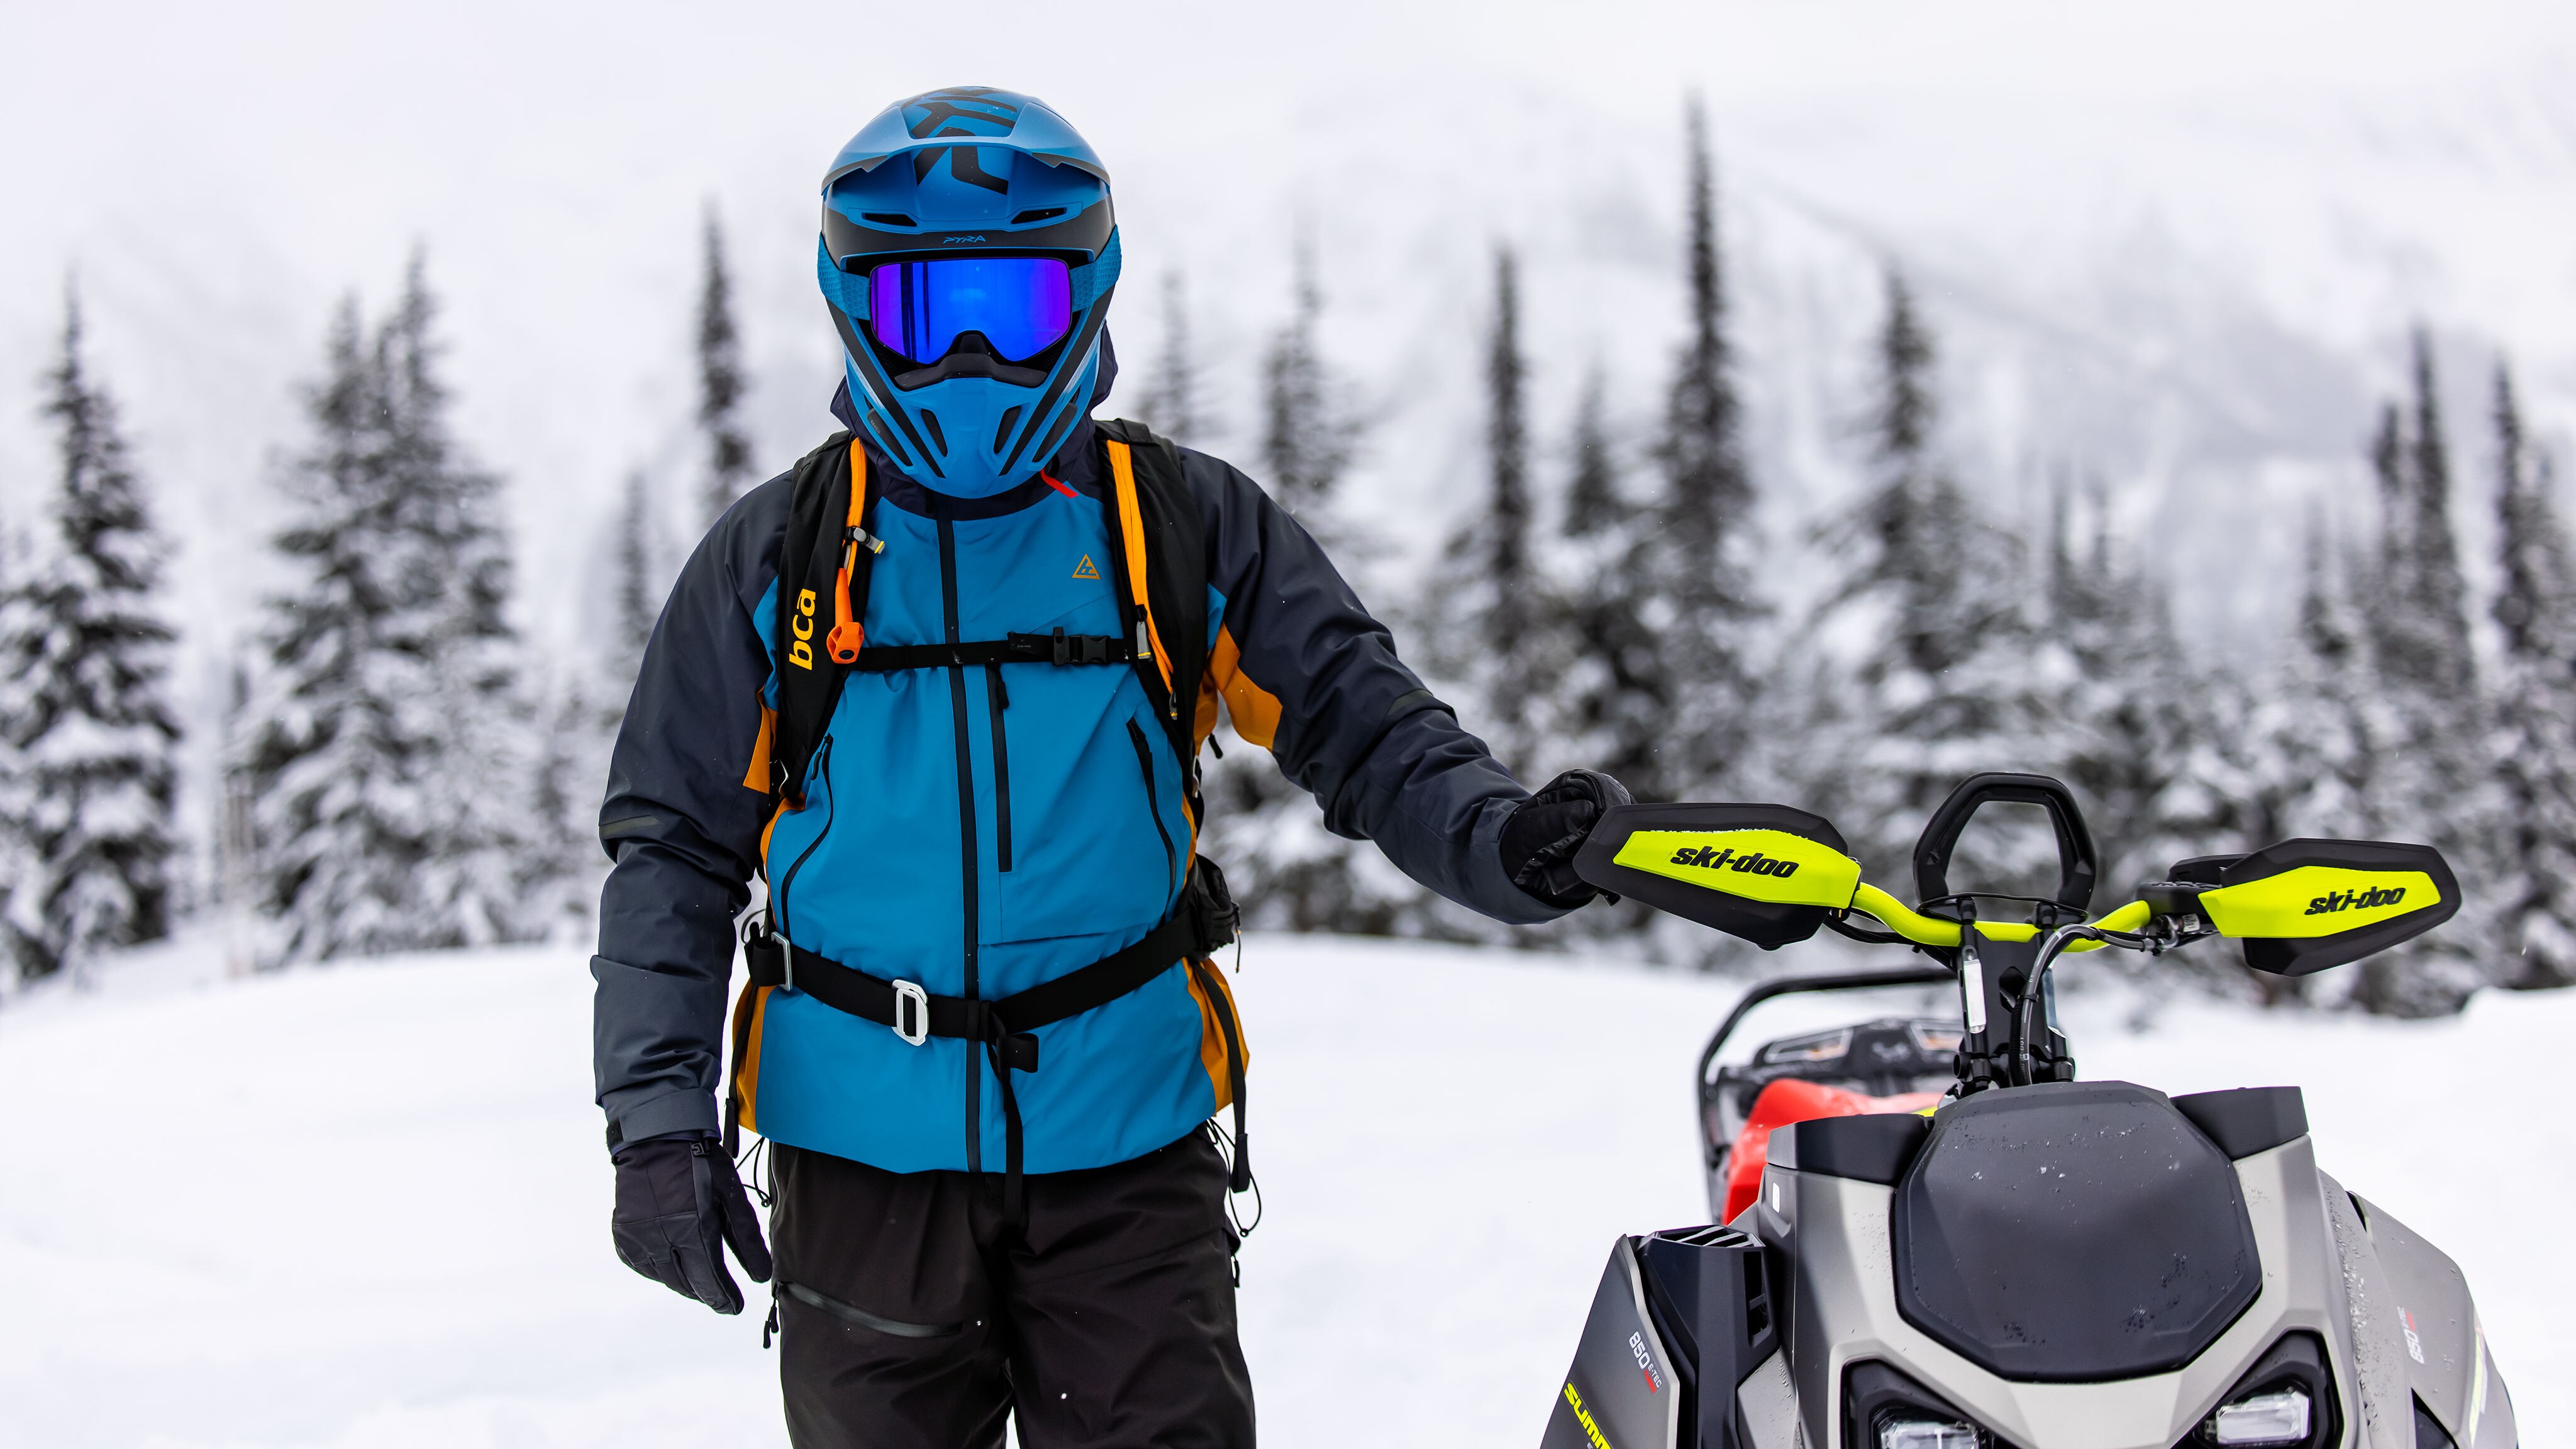 Fully geared up rider next to a 2023 Ski-Doo Summit snowmobile